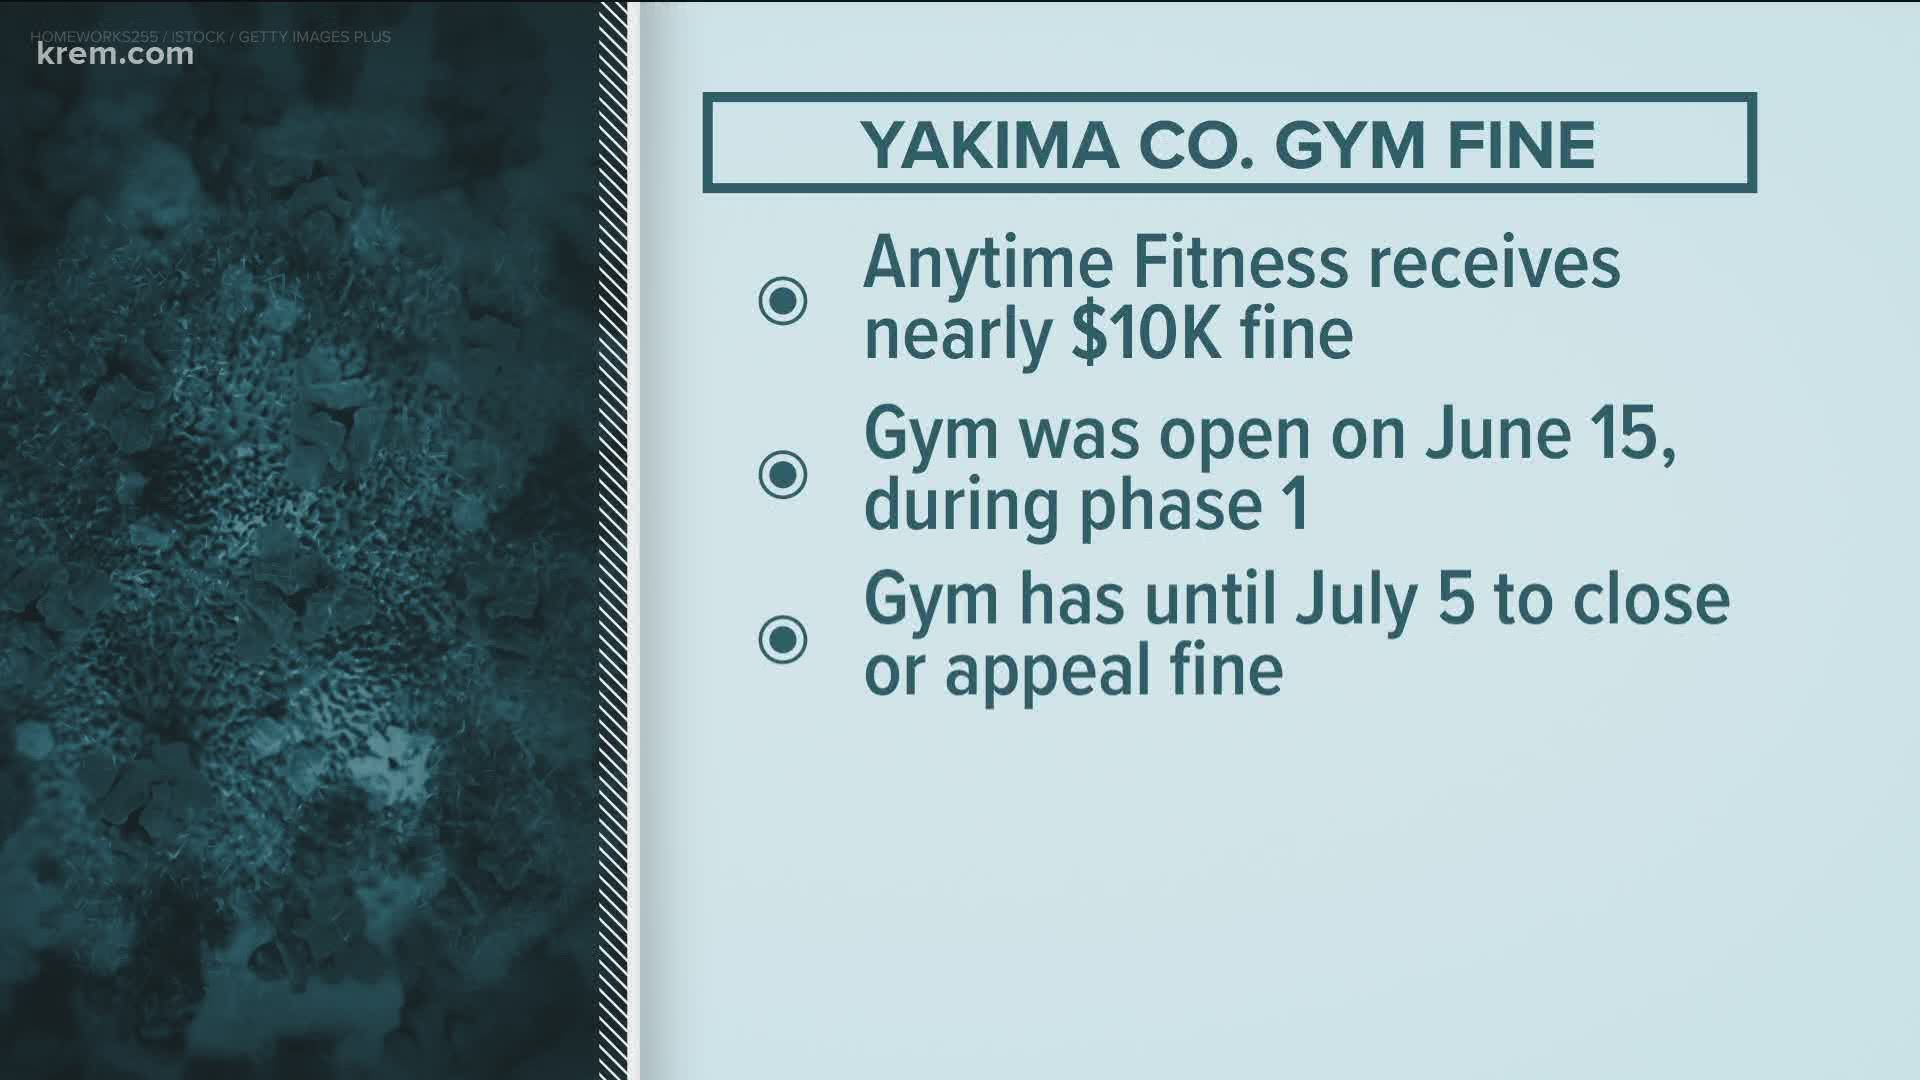 Anytime Fitness Selah was found to be in violation of the state's reopening plan after multiple public complaints and a referral from the local health department.